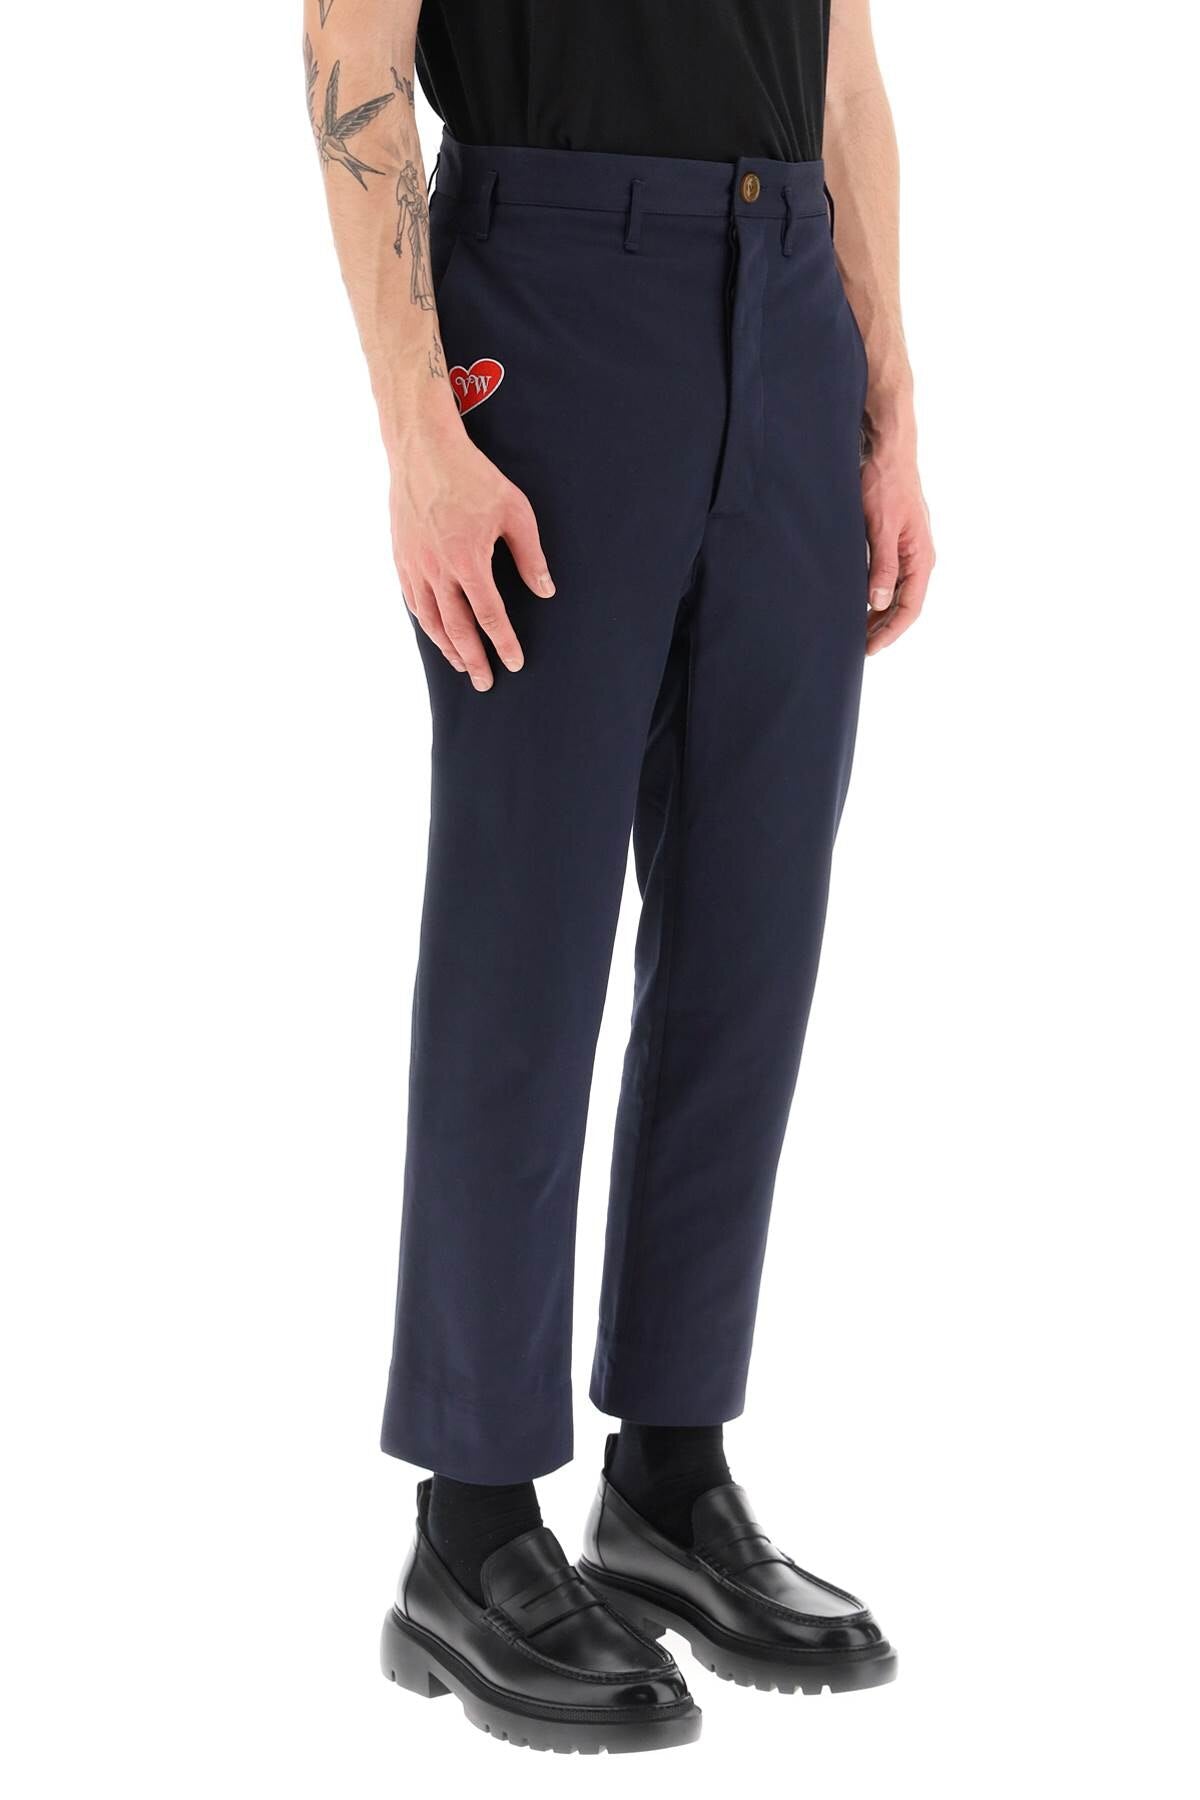 Vivienne Westwood Cropped Cruise Pants Featuring Embroidered Heart